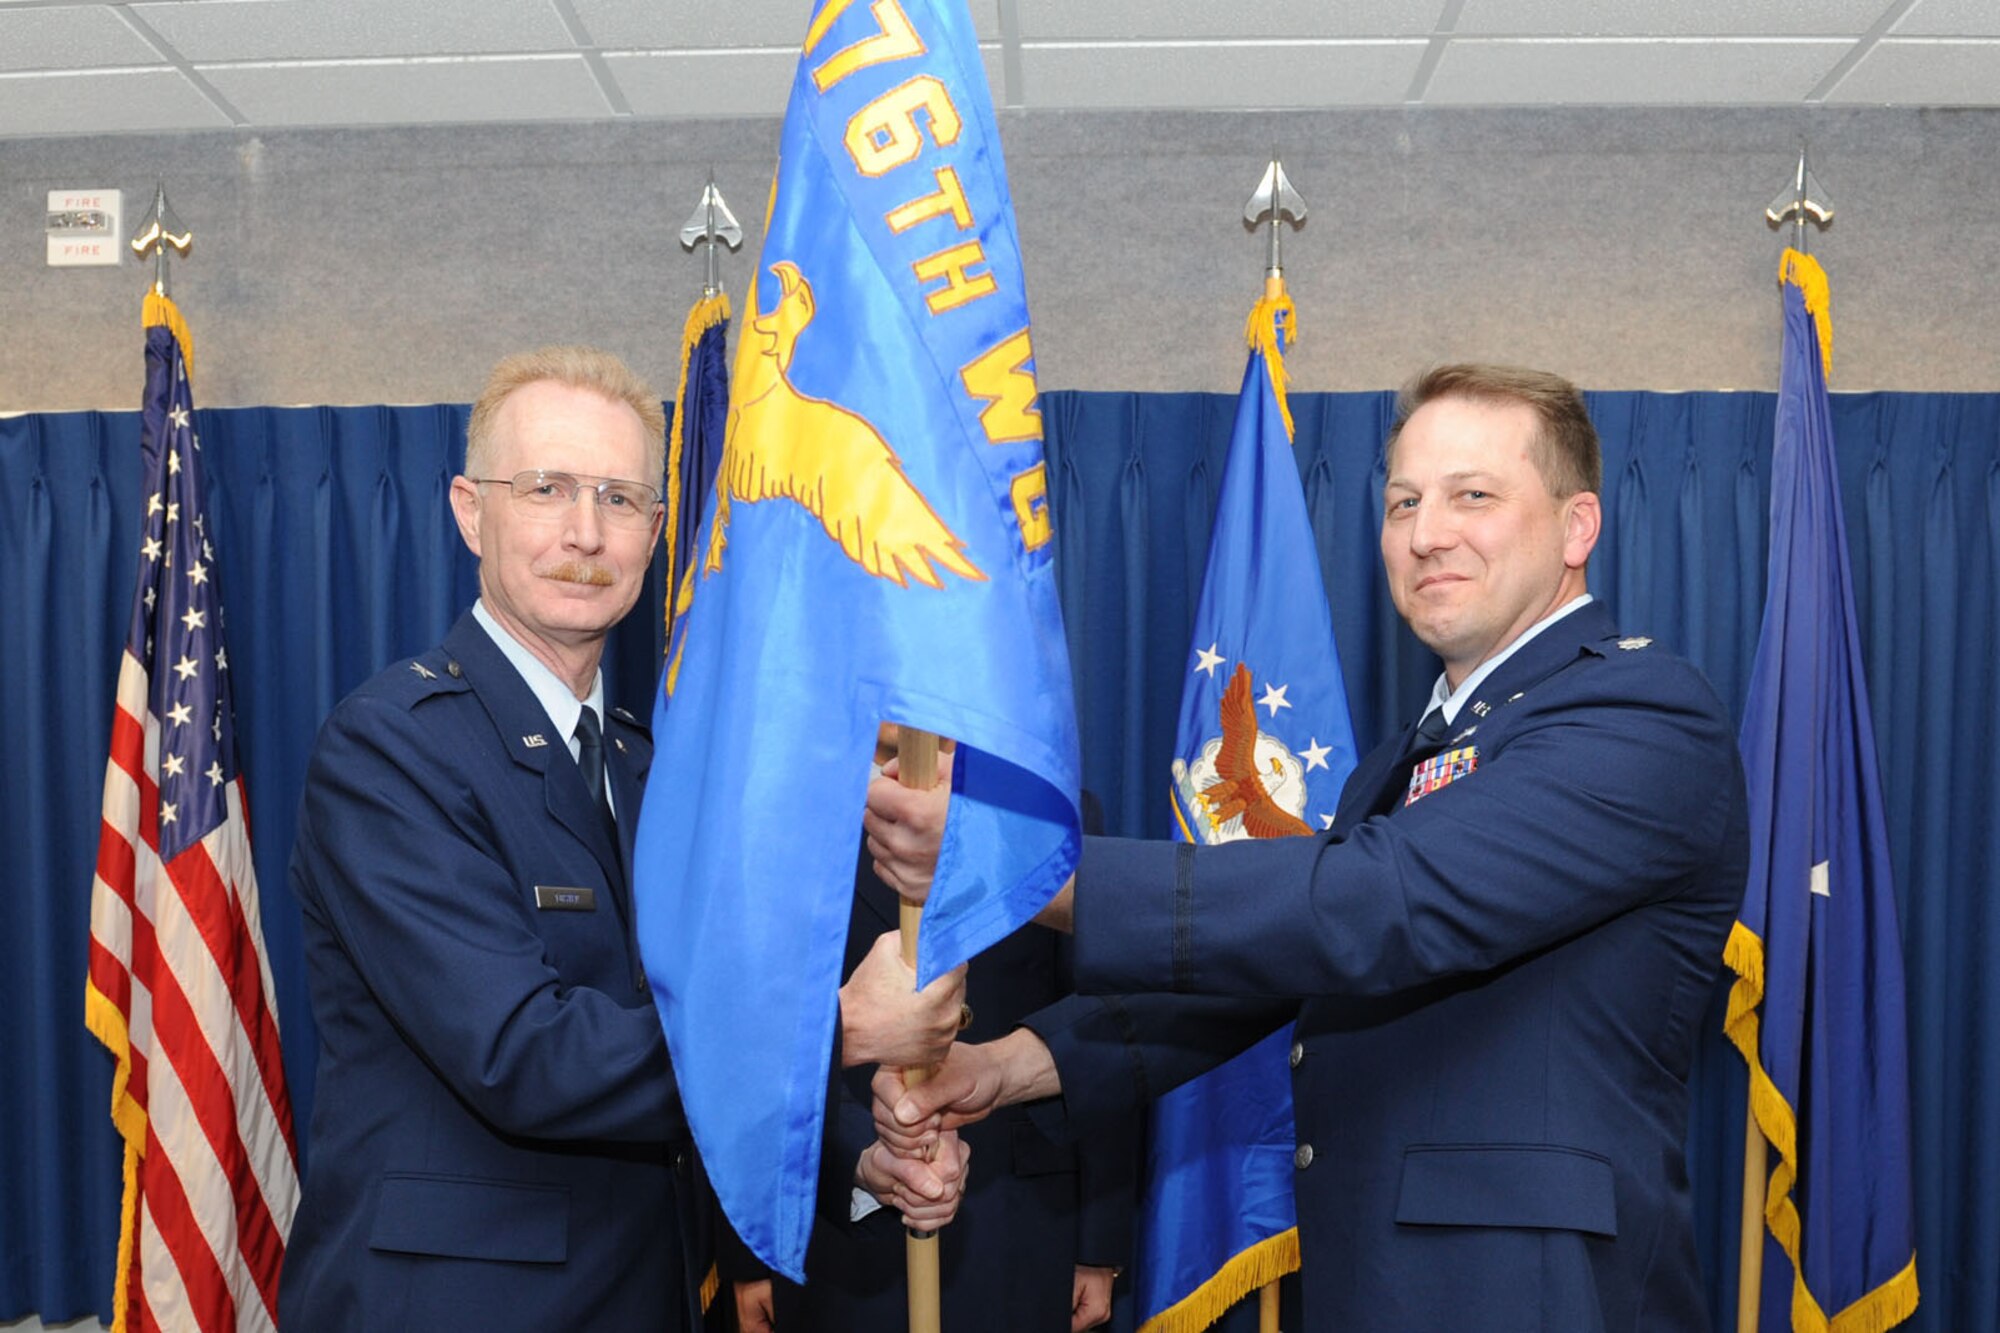 JOINT BASE ELMENDORF-RICHARDSON, Alaska ? Lt. Col. Mark Hedlund from the Joint Forces Headquarters, Alaska, Alaska Air National Guard on Fort Richardson accepts the command of the 176th Maintenance Group, Alaska Air National Guard from Brig. Gen. Charles Foster, commander of the 176th Wing, April 17, 2011. Hedlund recently served as the state director of operations and director of staff and is familiar with the 176th Wing, having previously served as commander of its 144th Airlift Squadron, deputy commander of its 176th Operations Group, and in a variety of other roles. Alaska Air National Guard photo by Master Sgt. Shannon Oleson.